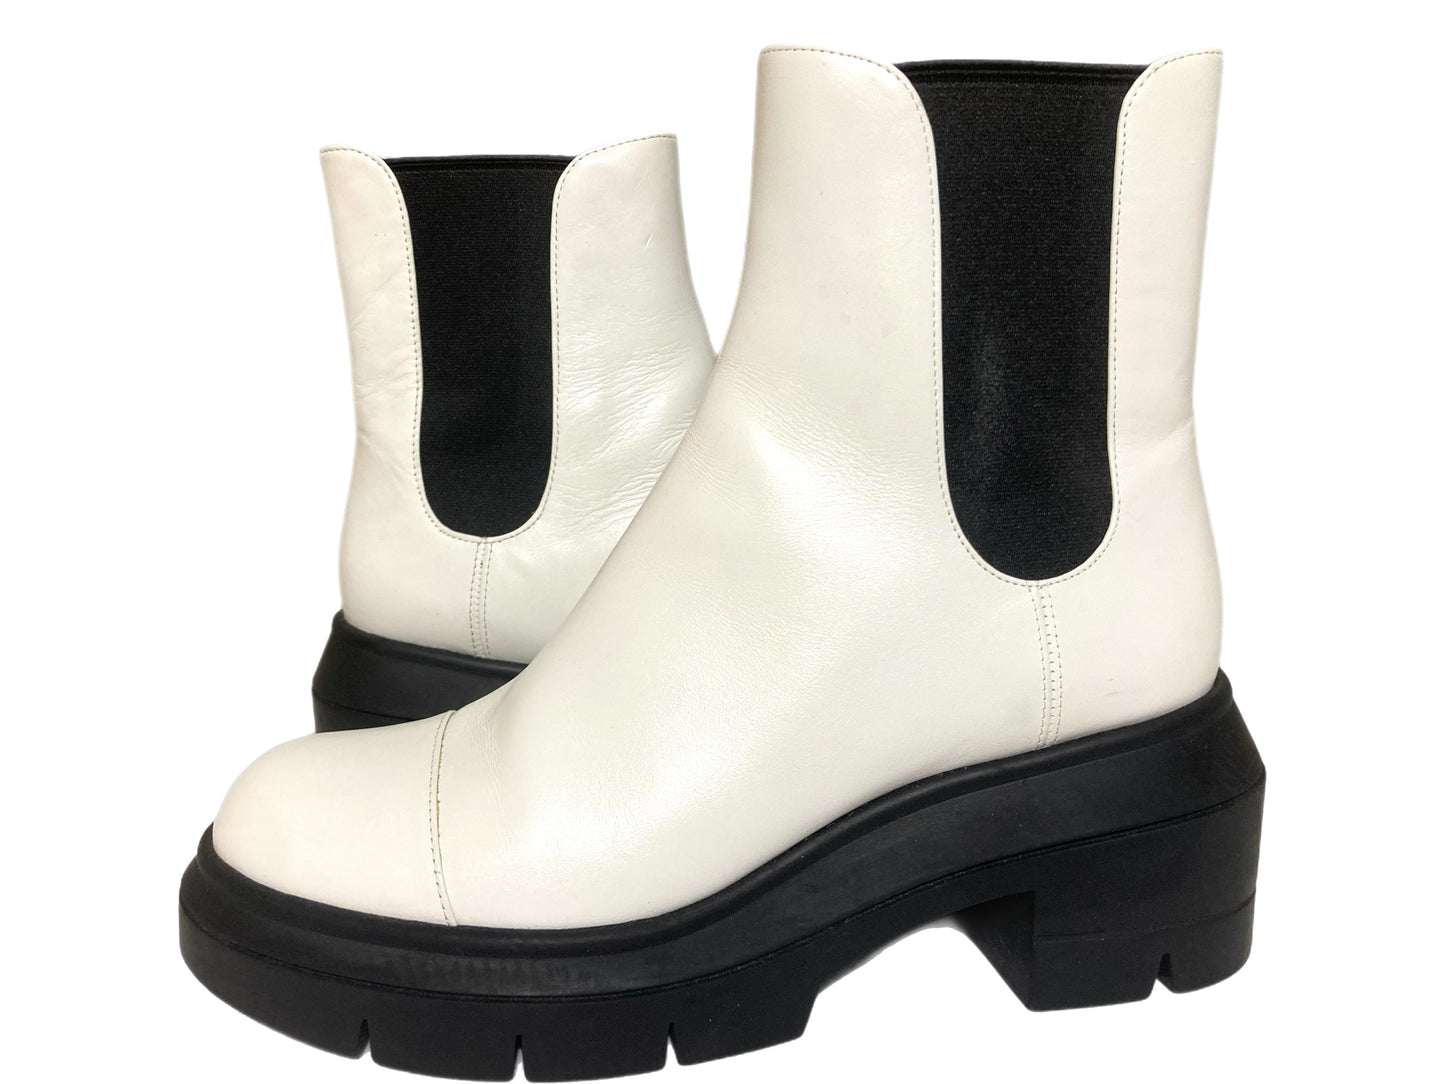 STUART WEITZMAN Leather Pull On Booties White Size 7 Wide